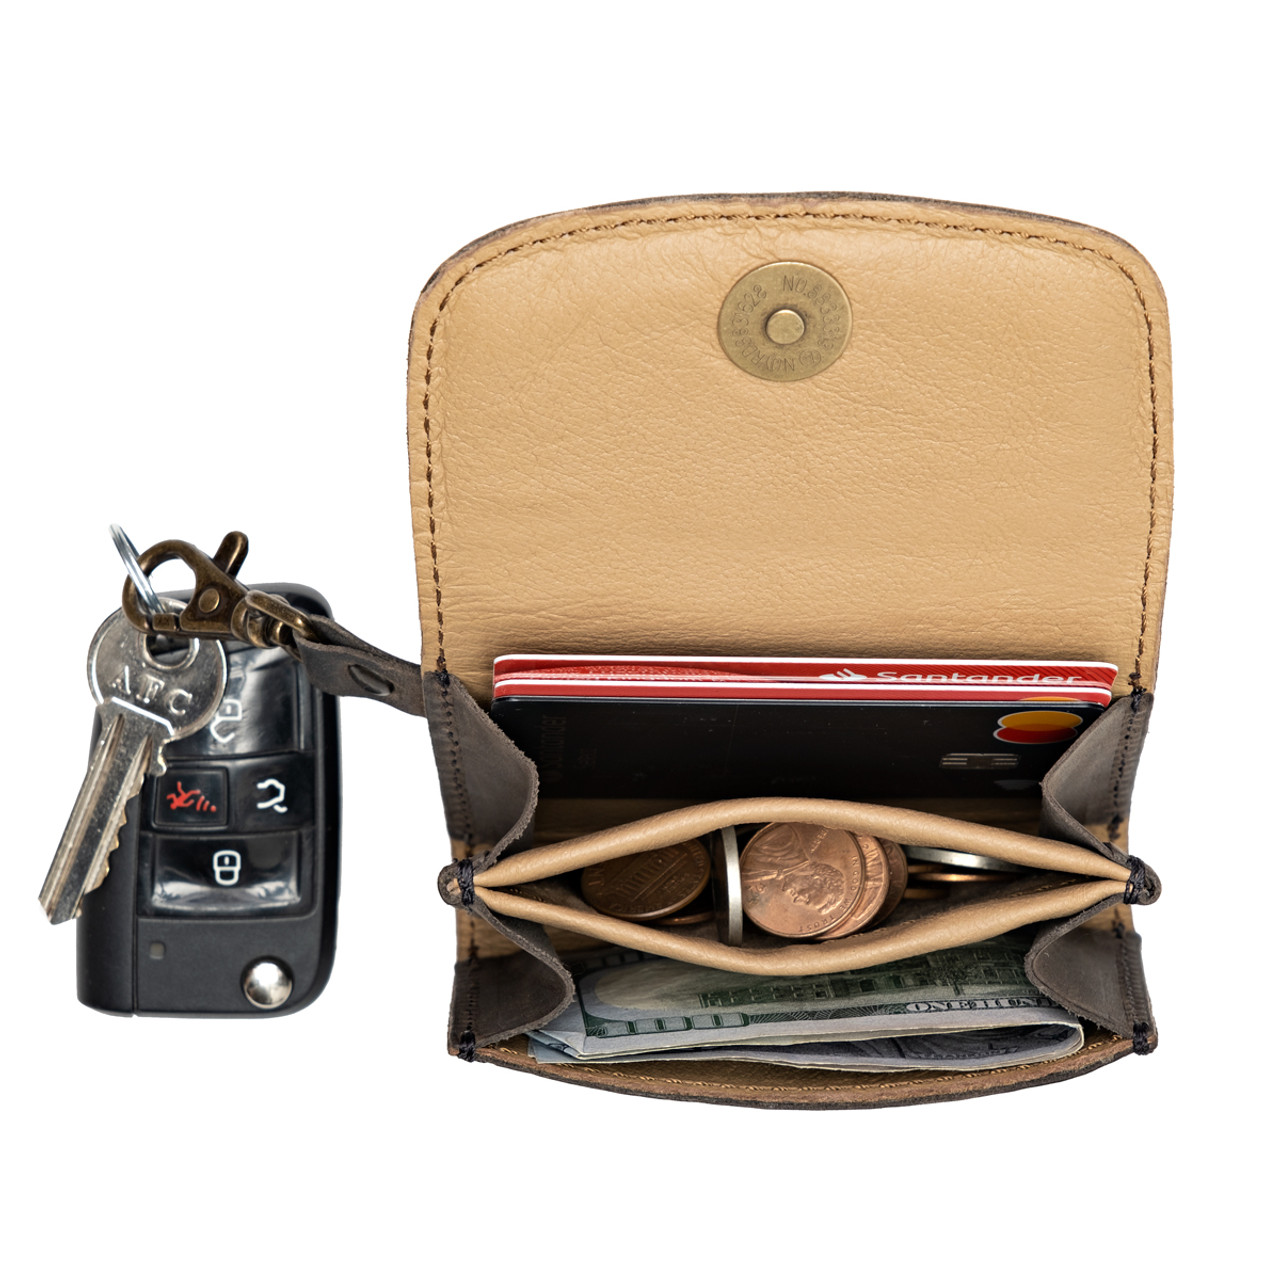 Keychain Wallet – Allred Leather Company